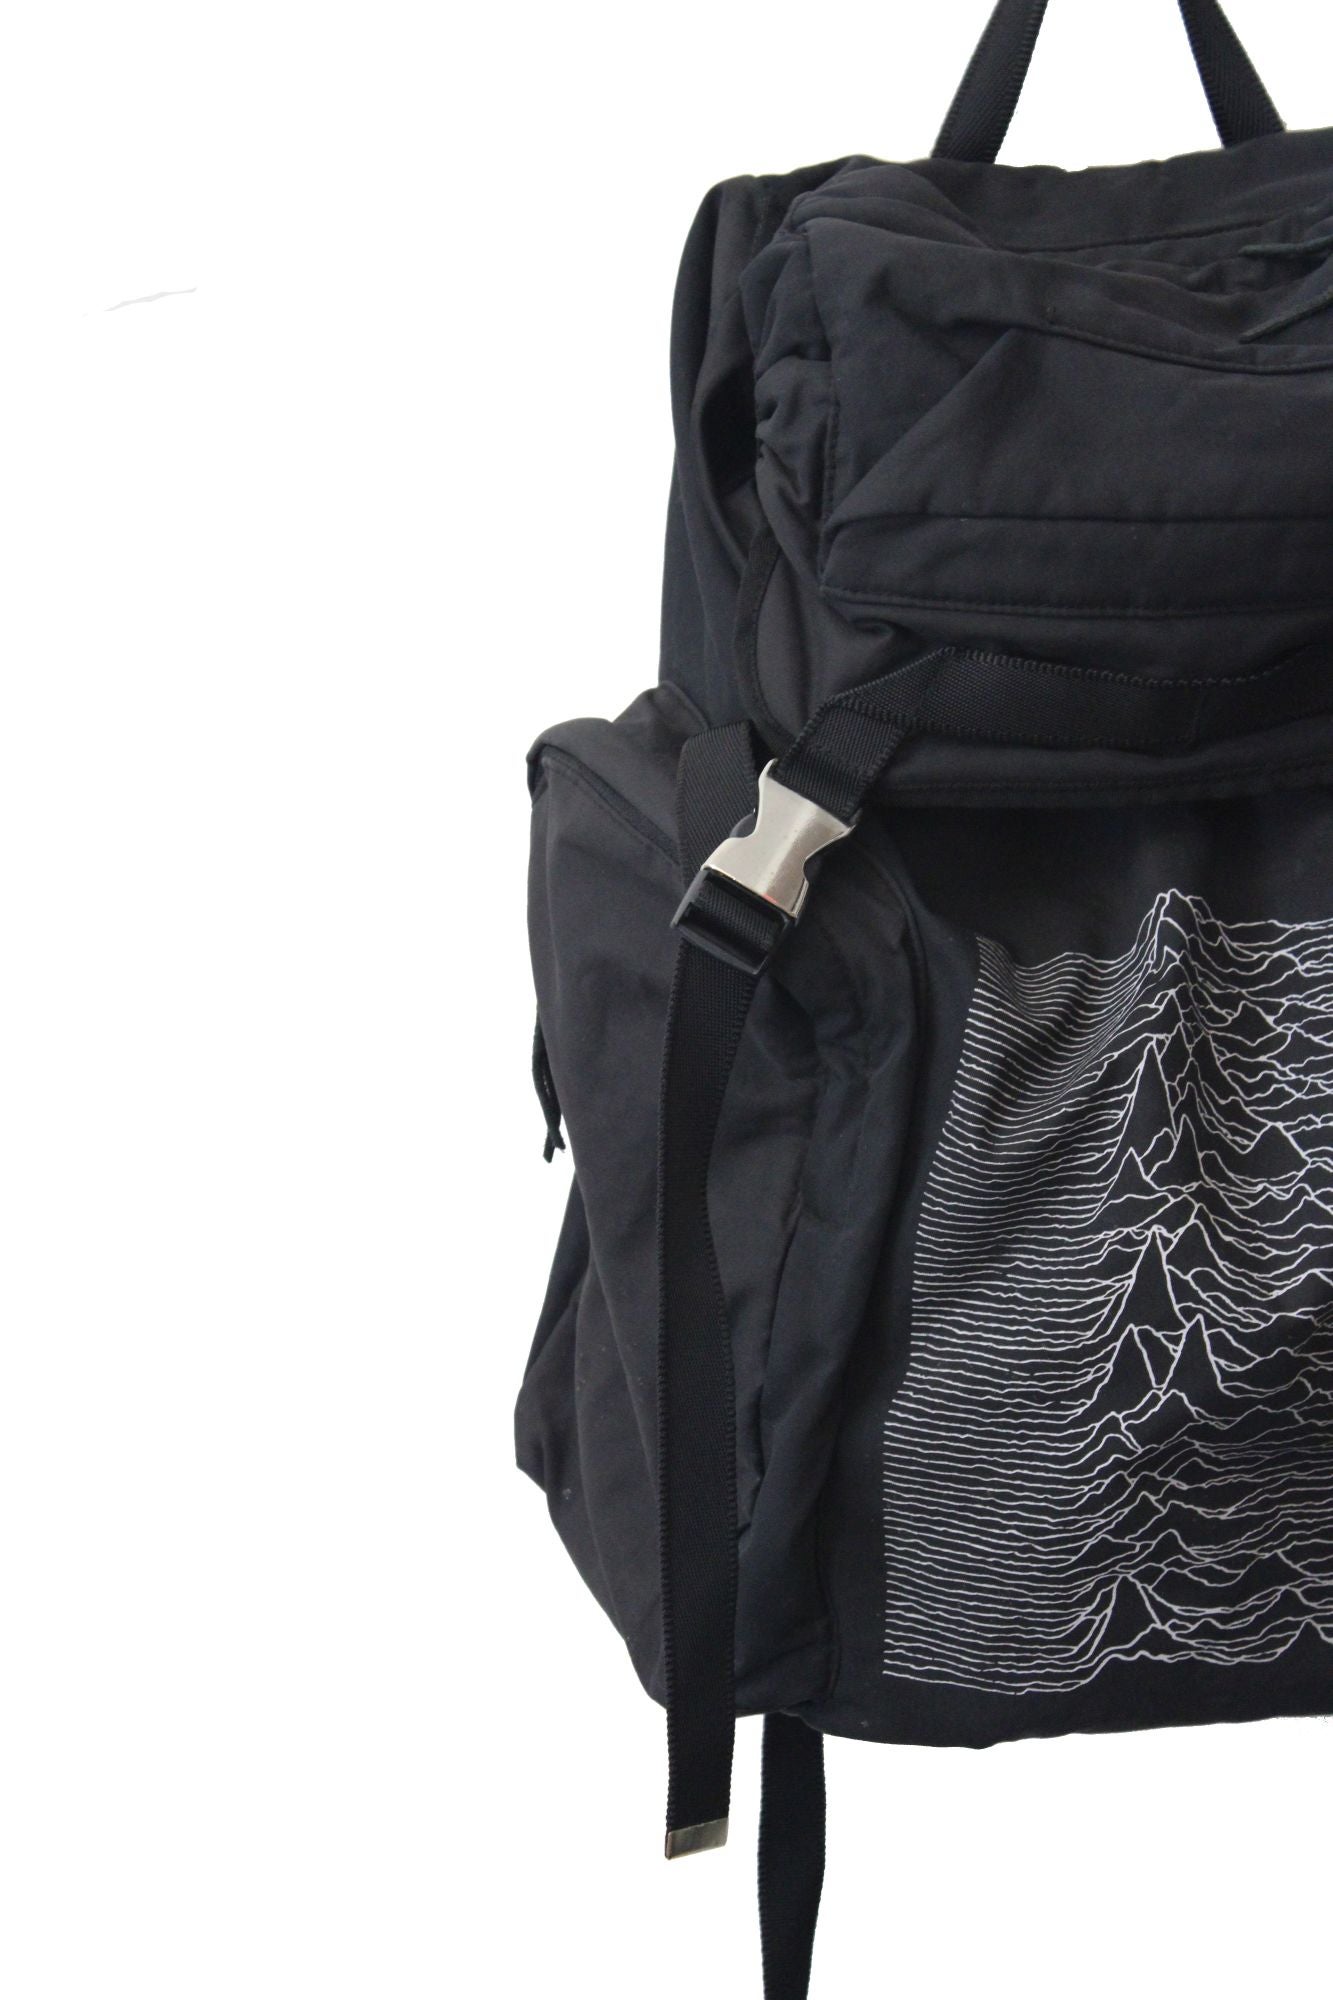 Unknown Pleasures Backpack by Undercover Co